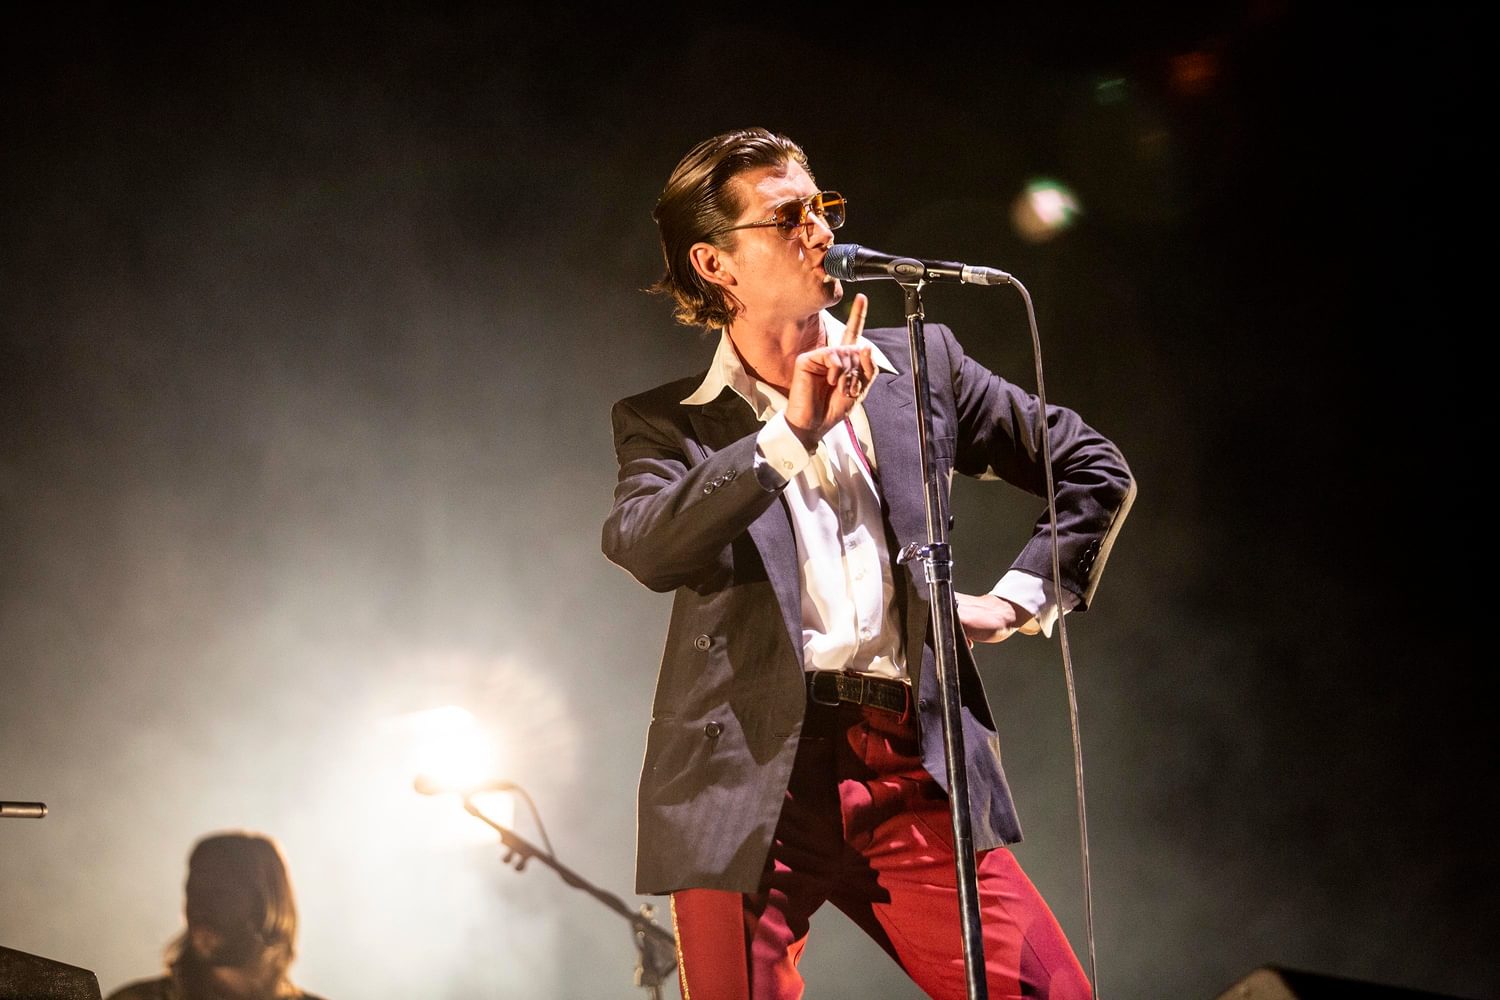 Arctic Monkeys bring ‘Tranquility Base Hotel & Casino’ to Mad Cool for a celebratory Day Two headline set